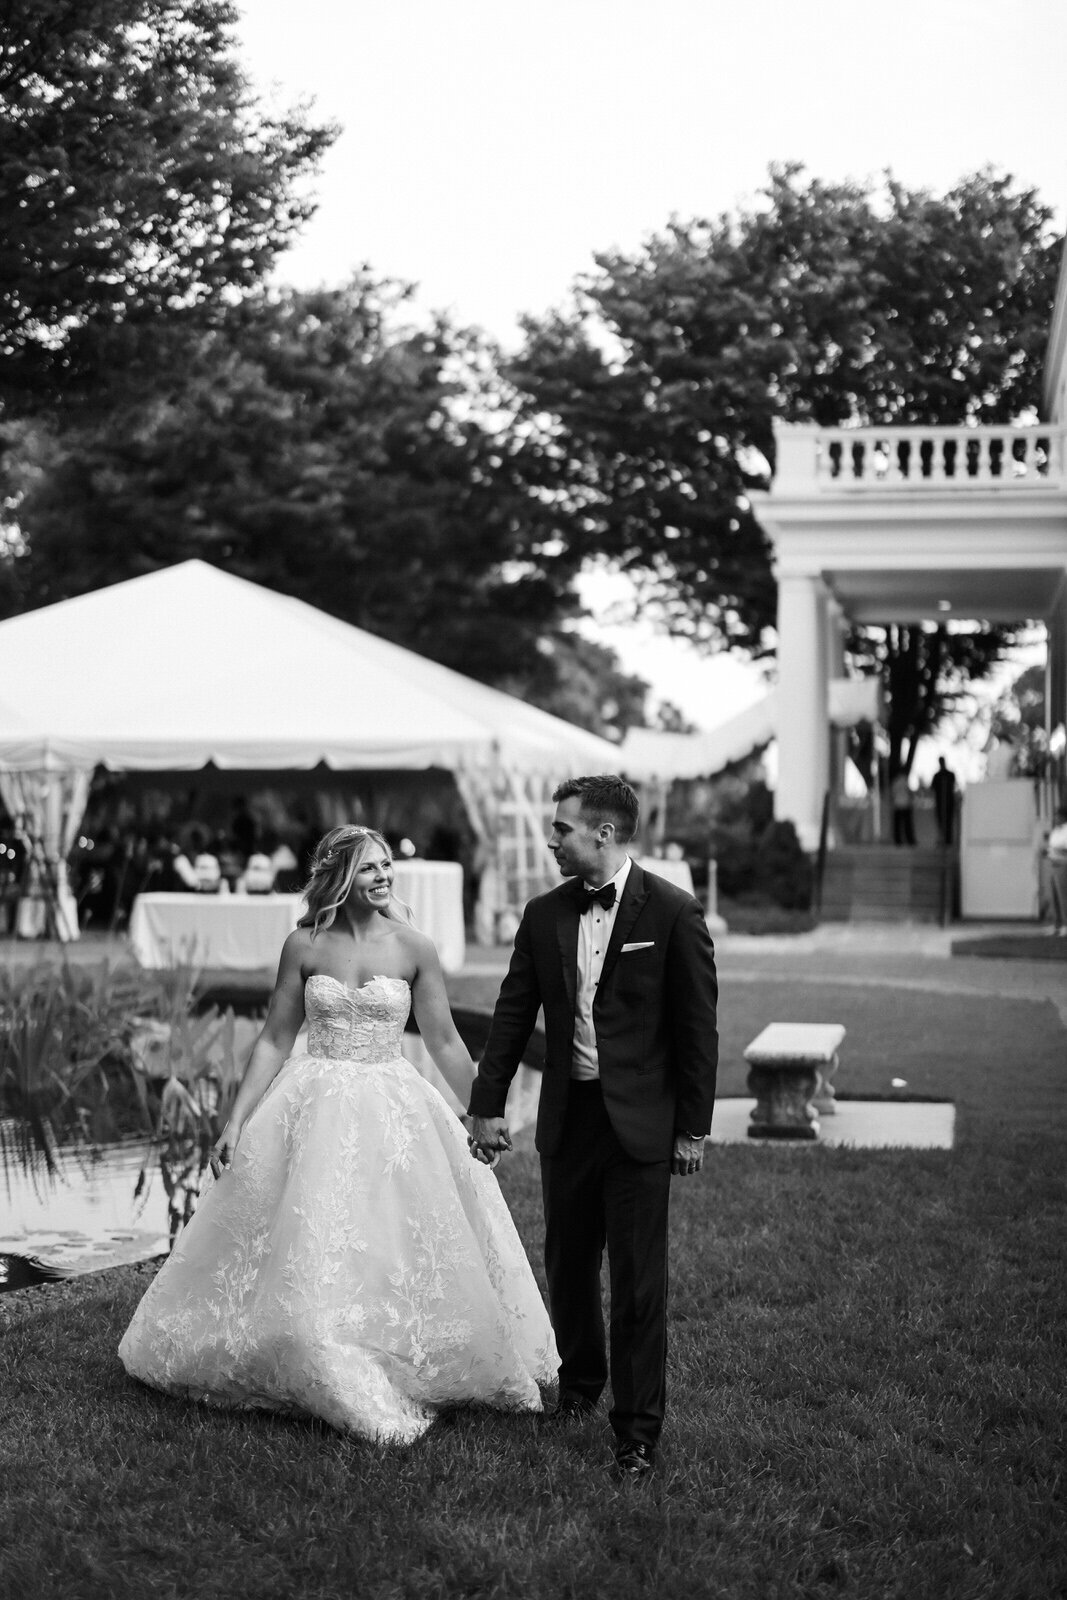 Intimate wedding portraits at an elegant summer wedding at Strong Mansion, a historic wedding venue in Maryland.